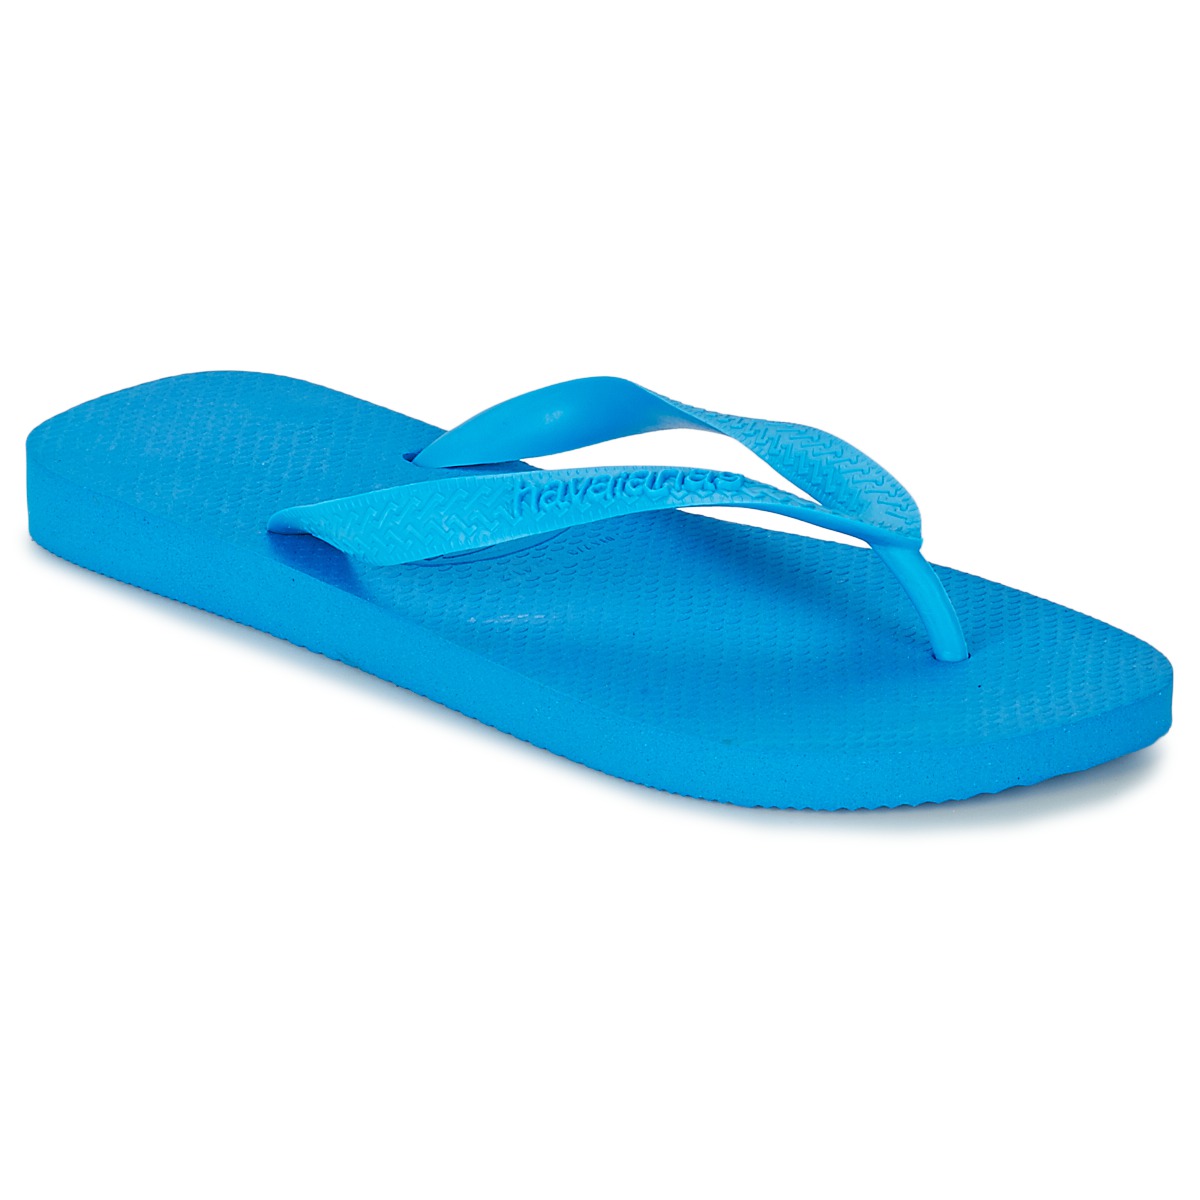 Havaianas Turquoise TOP GhxjBqRn